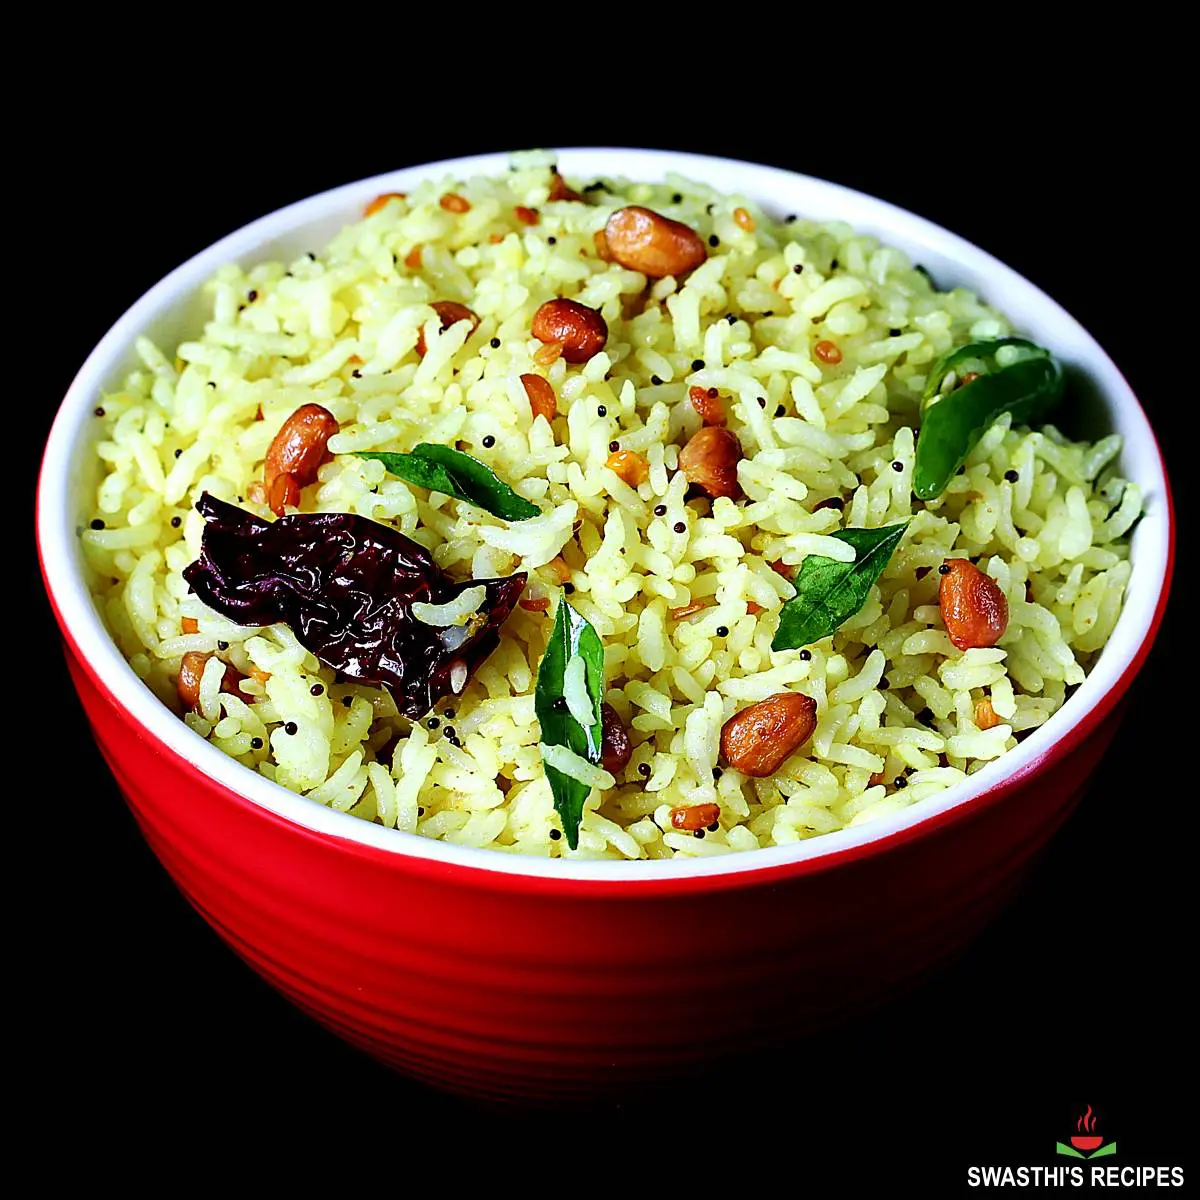 Lemon Rice Recipe made with precooked rice, spices and herbs